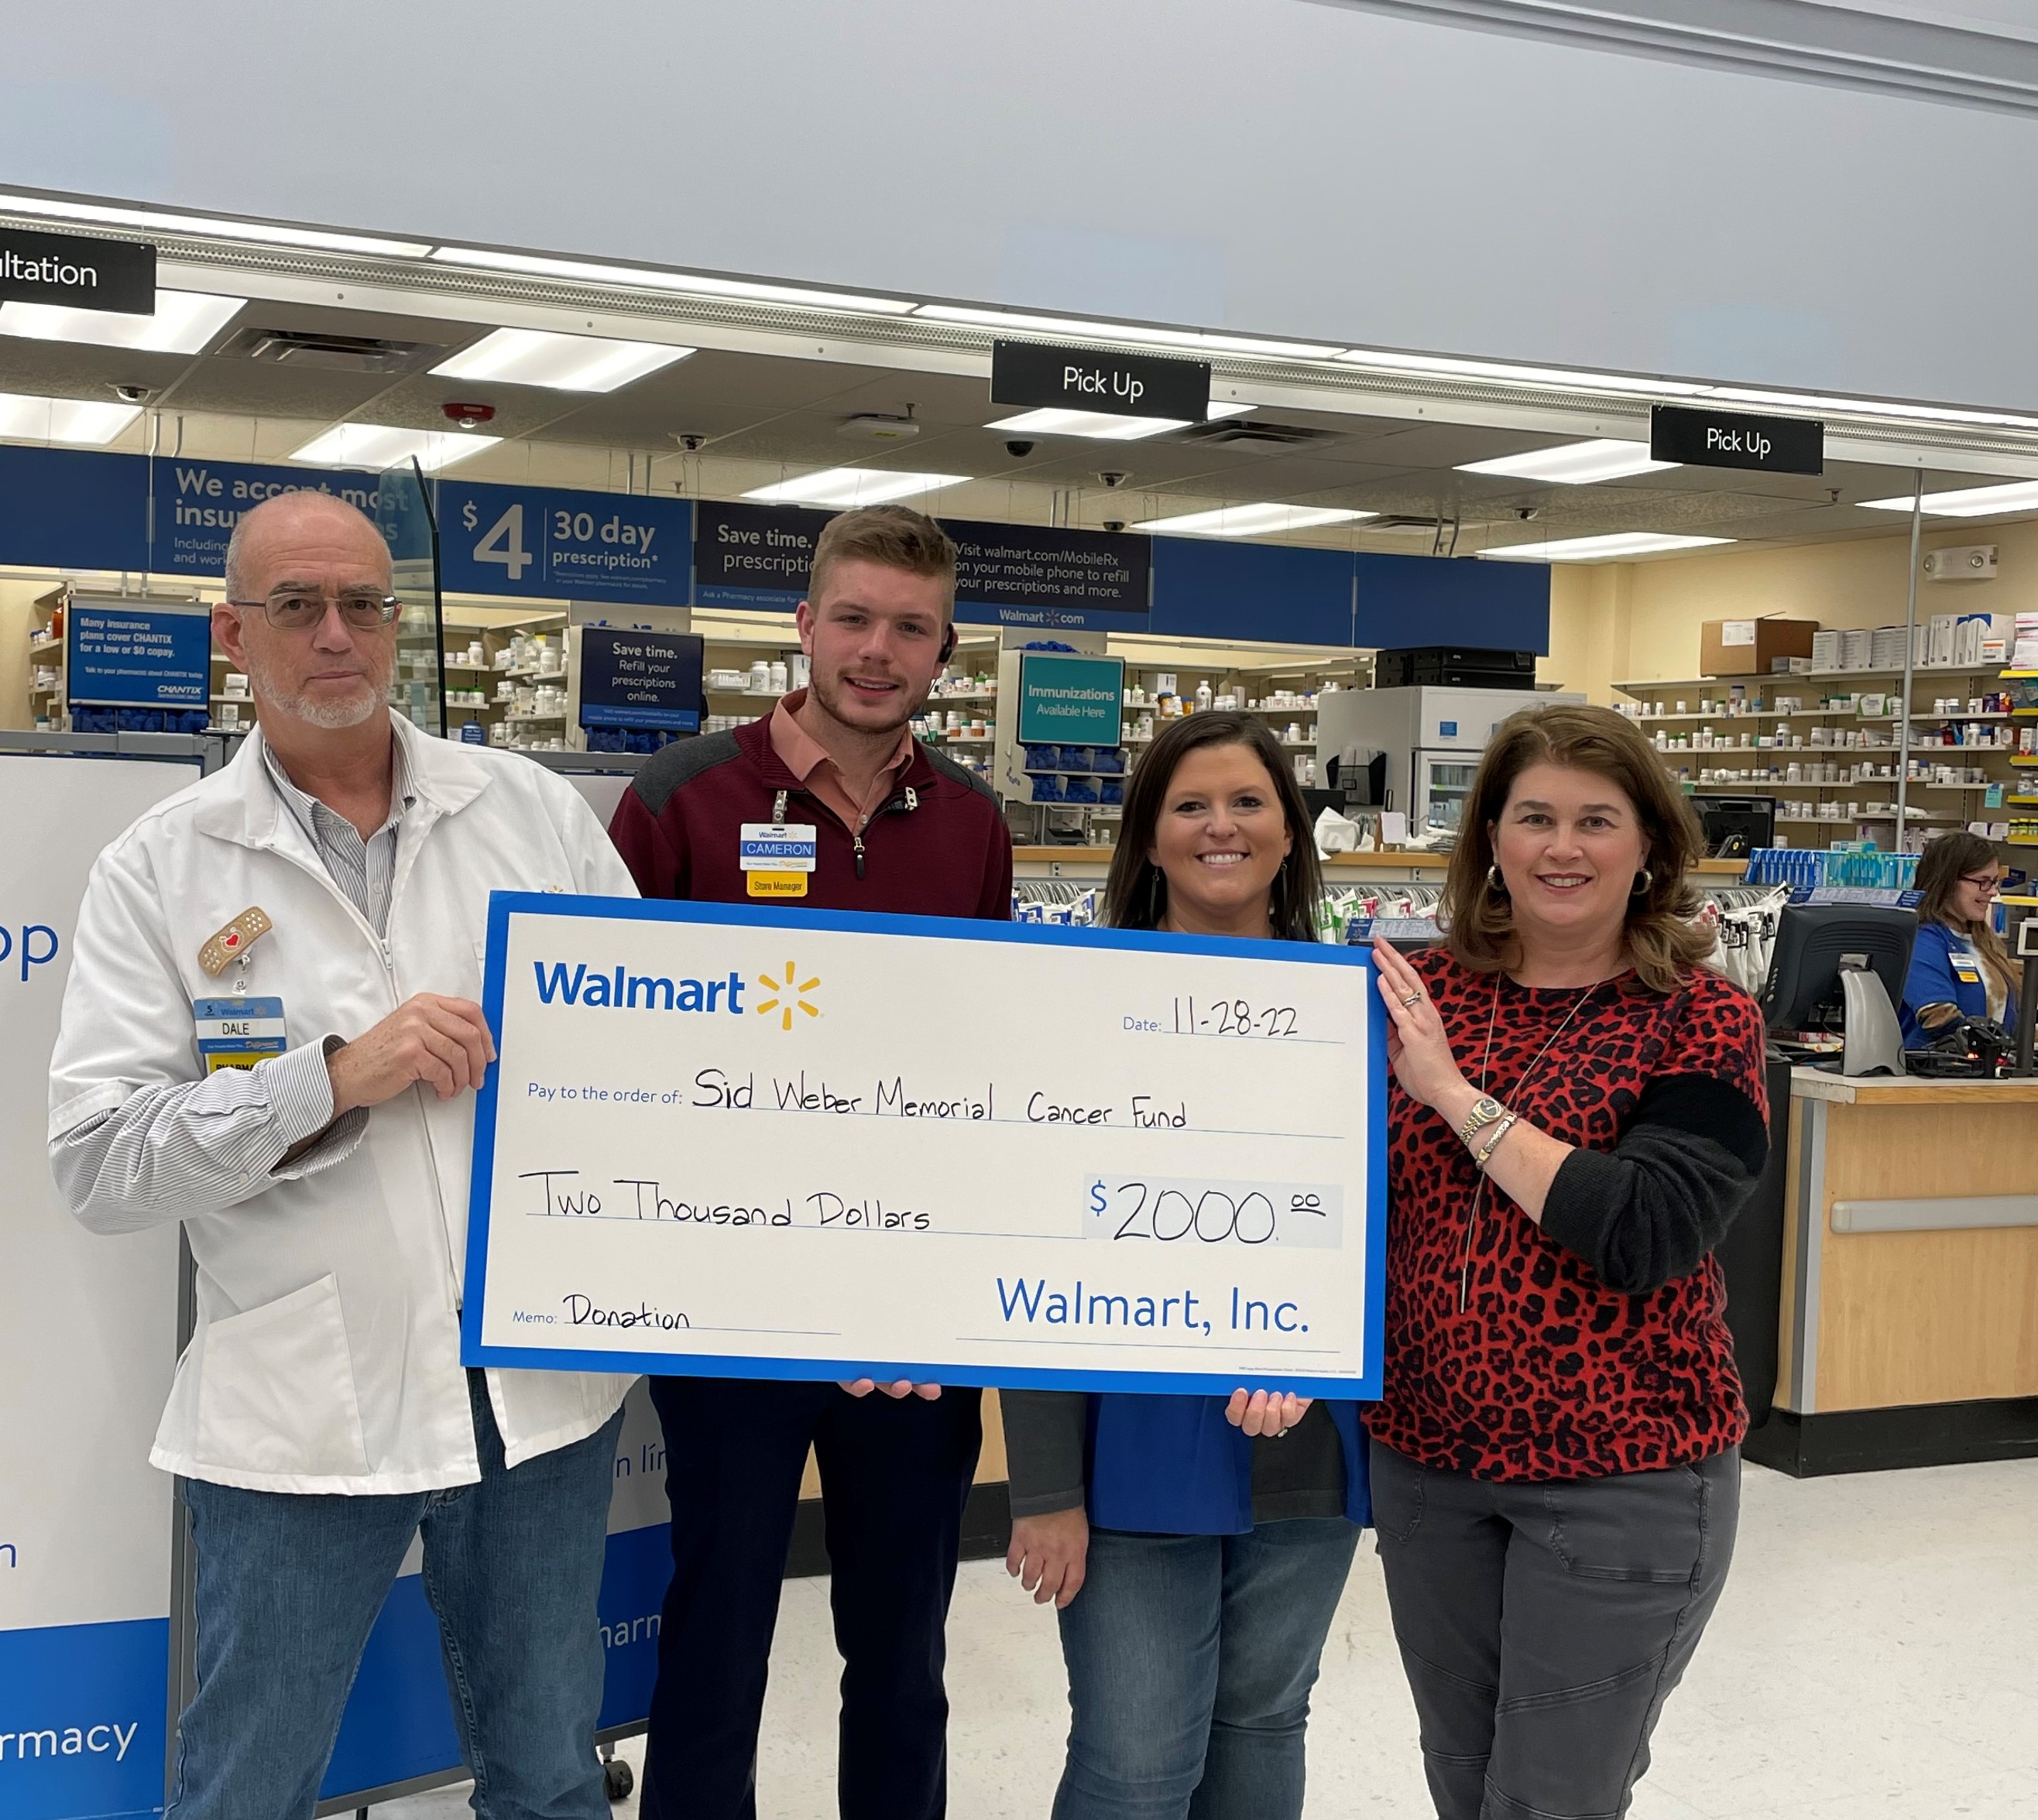 Submitted photo. Pictured are Dale Godwin, pharmacist, (left); Cameron Spivey, store manager; Whitney Upchurch, pharmacy technician; and Jennifer Arbitter, past president of Sid Weber Memorial Cancer Fund.